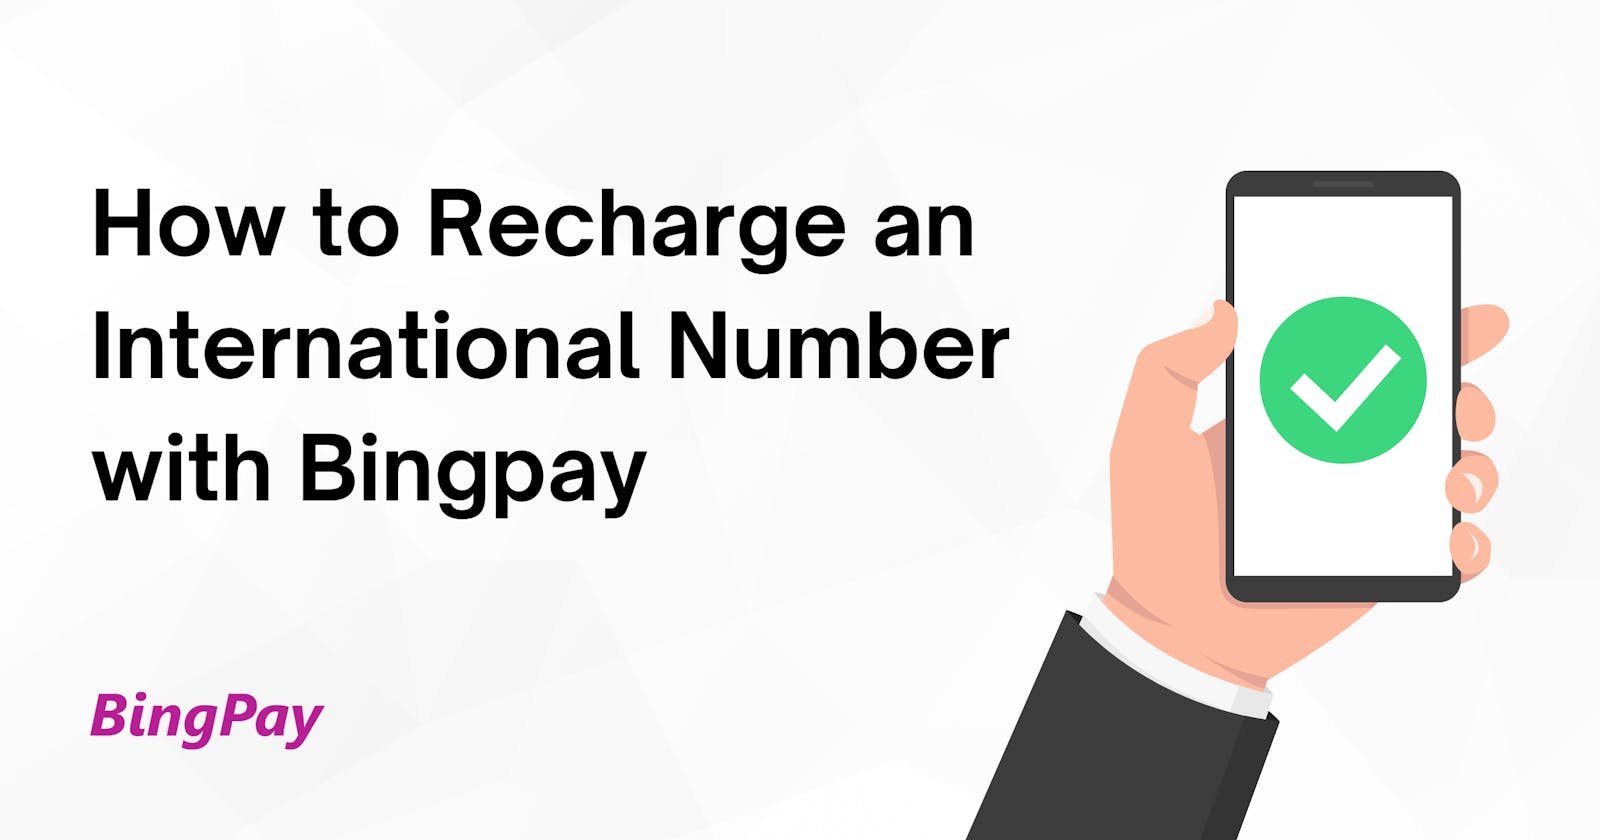 How to Recharge International Number with Bingpay